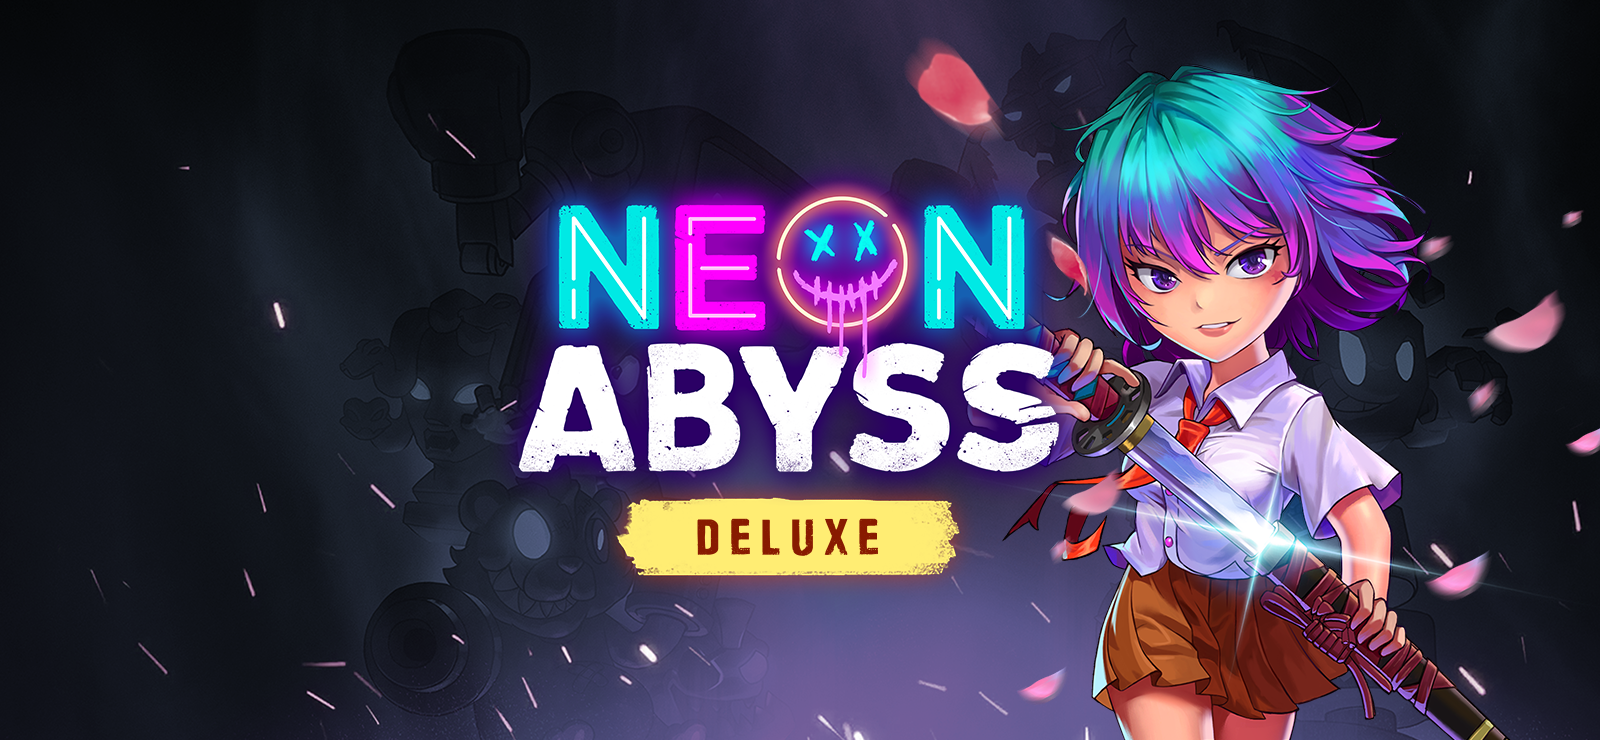 Neon Abyss - Deluxe Edition Bundle